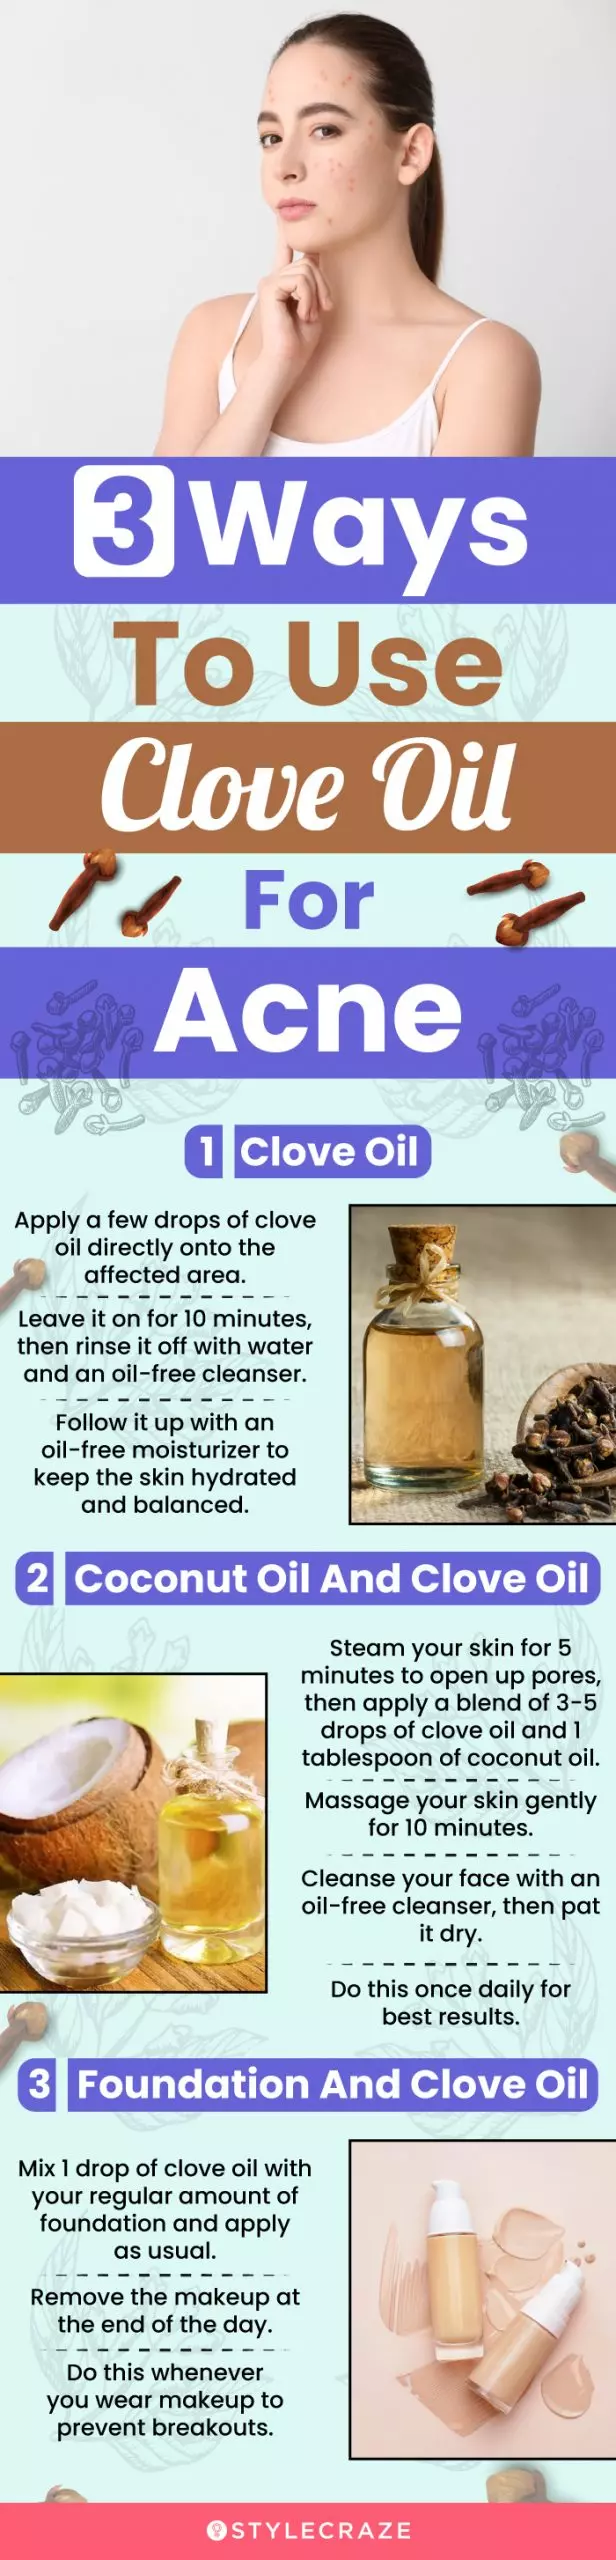 clove oil for acne (infographic)